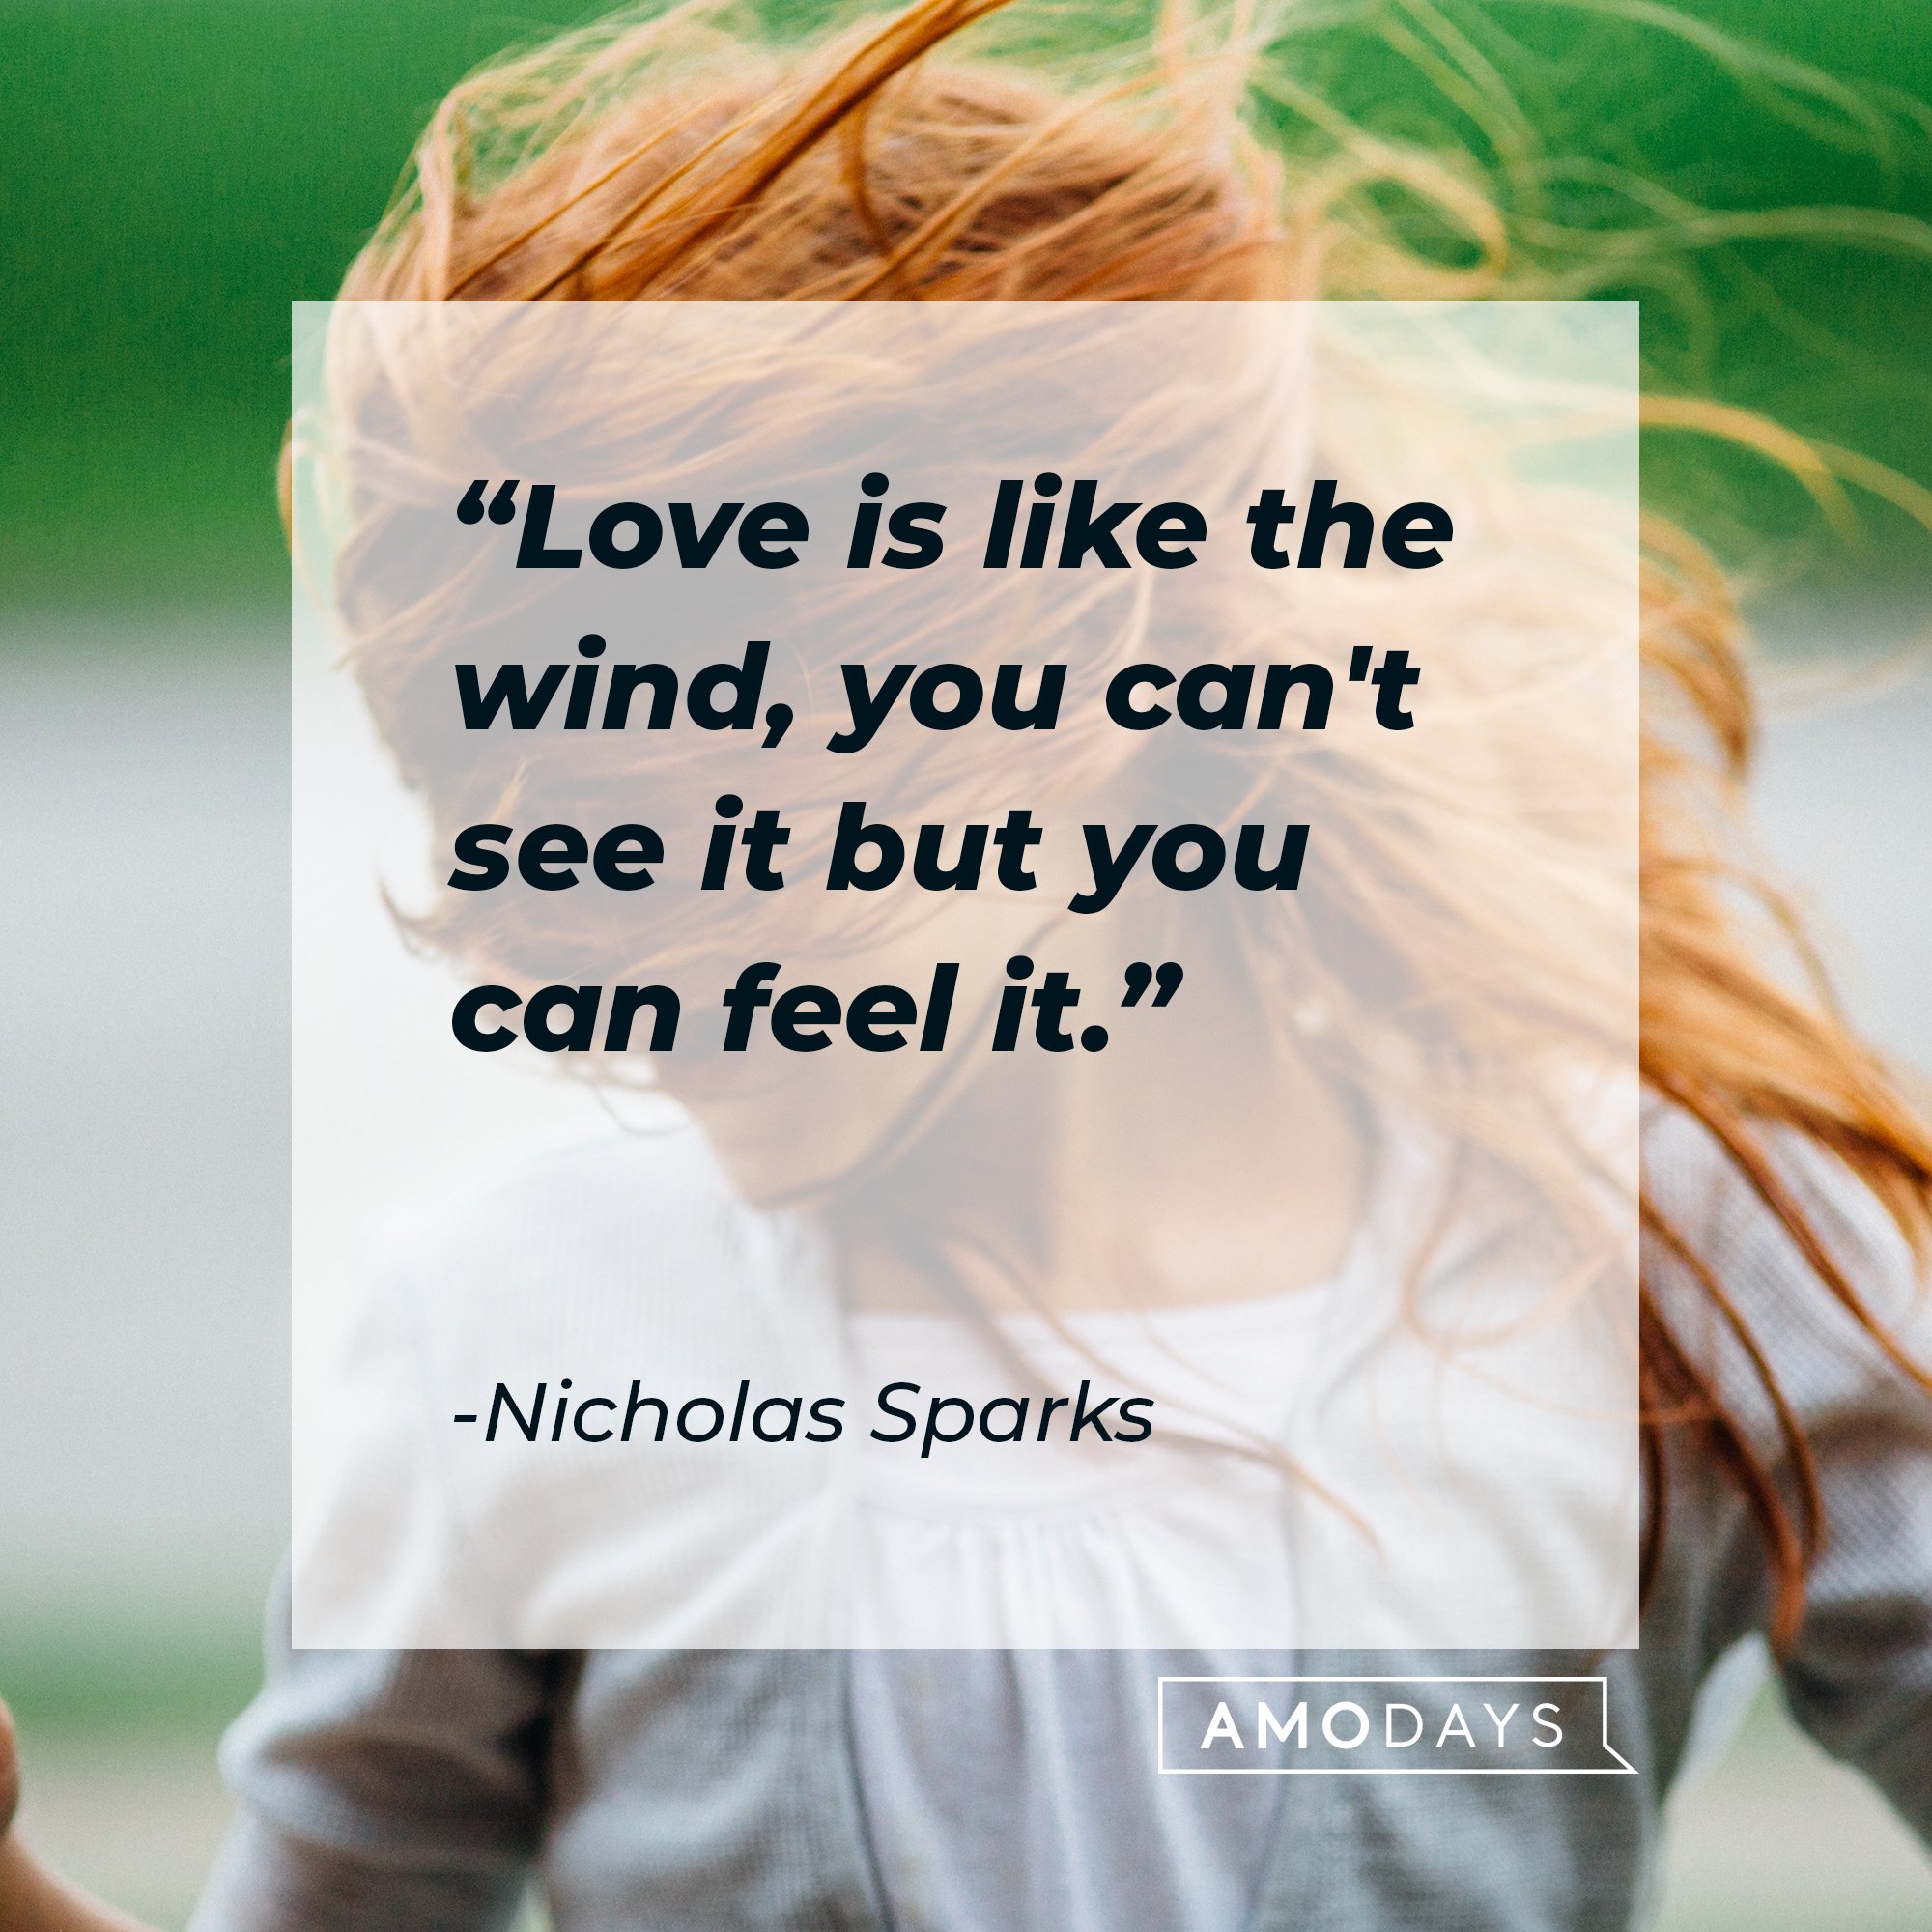 Nicholas Sparks' quote: "Love is like the wind, you can't see it but you can feel it." | Image: AmoDays